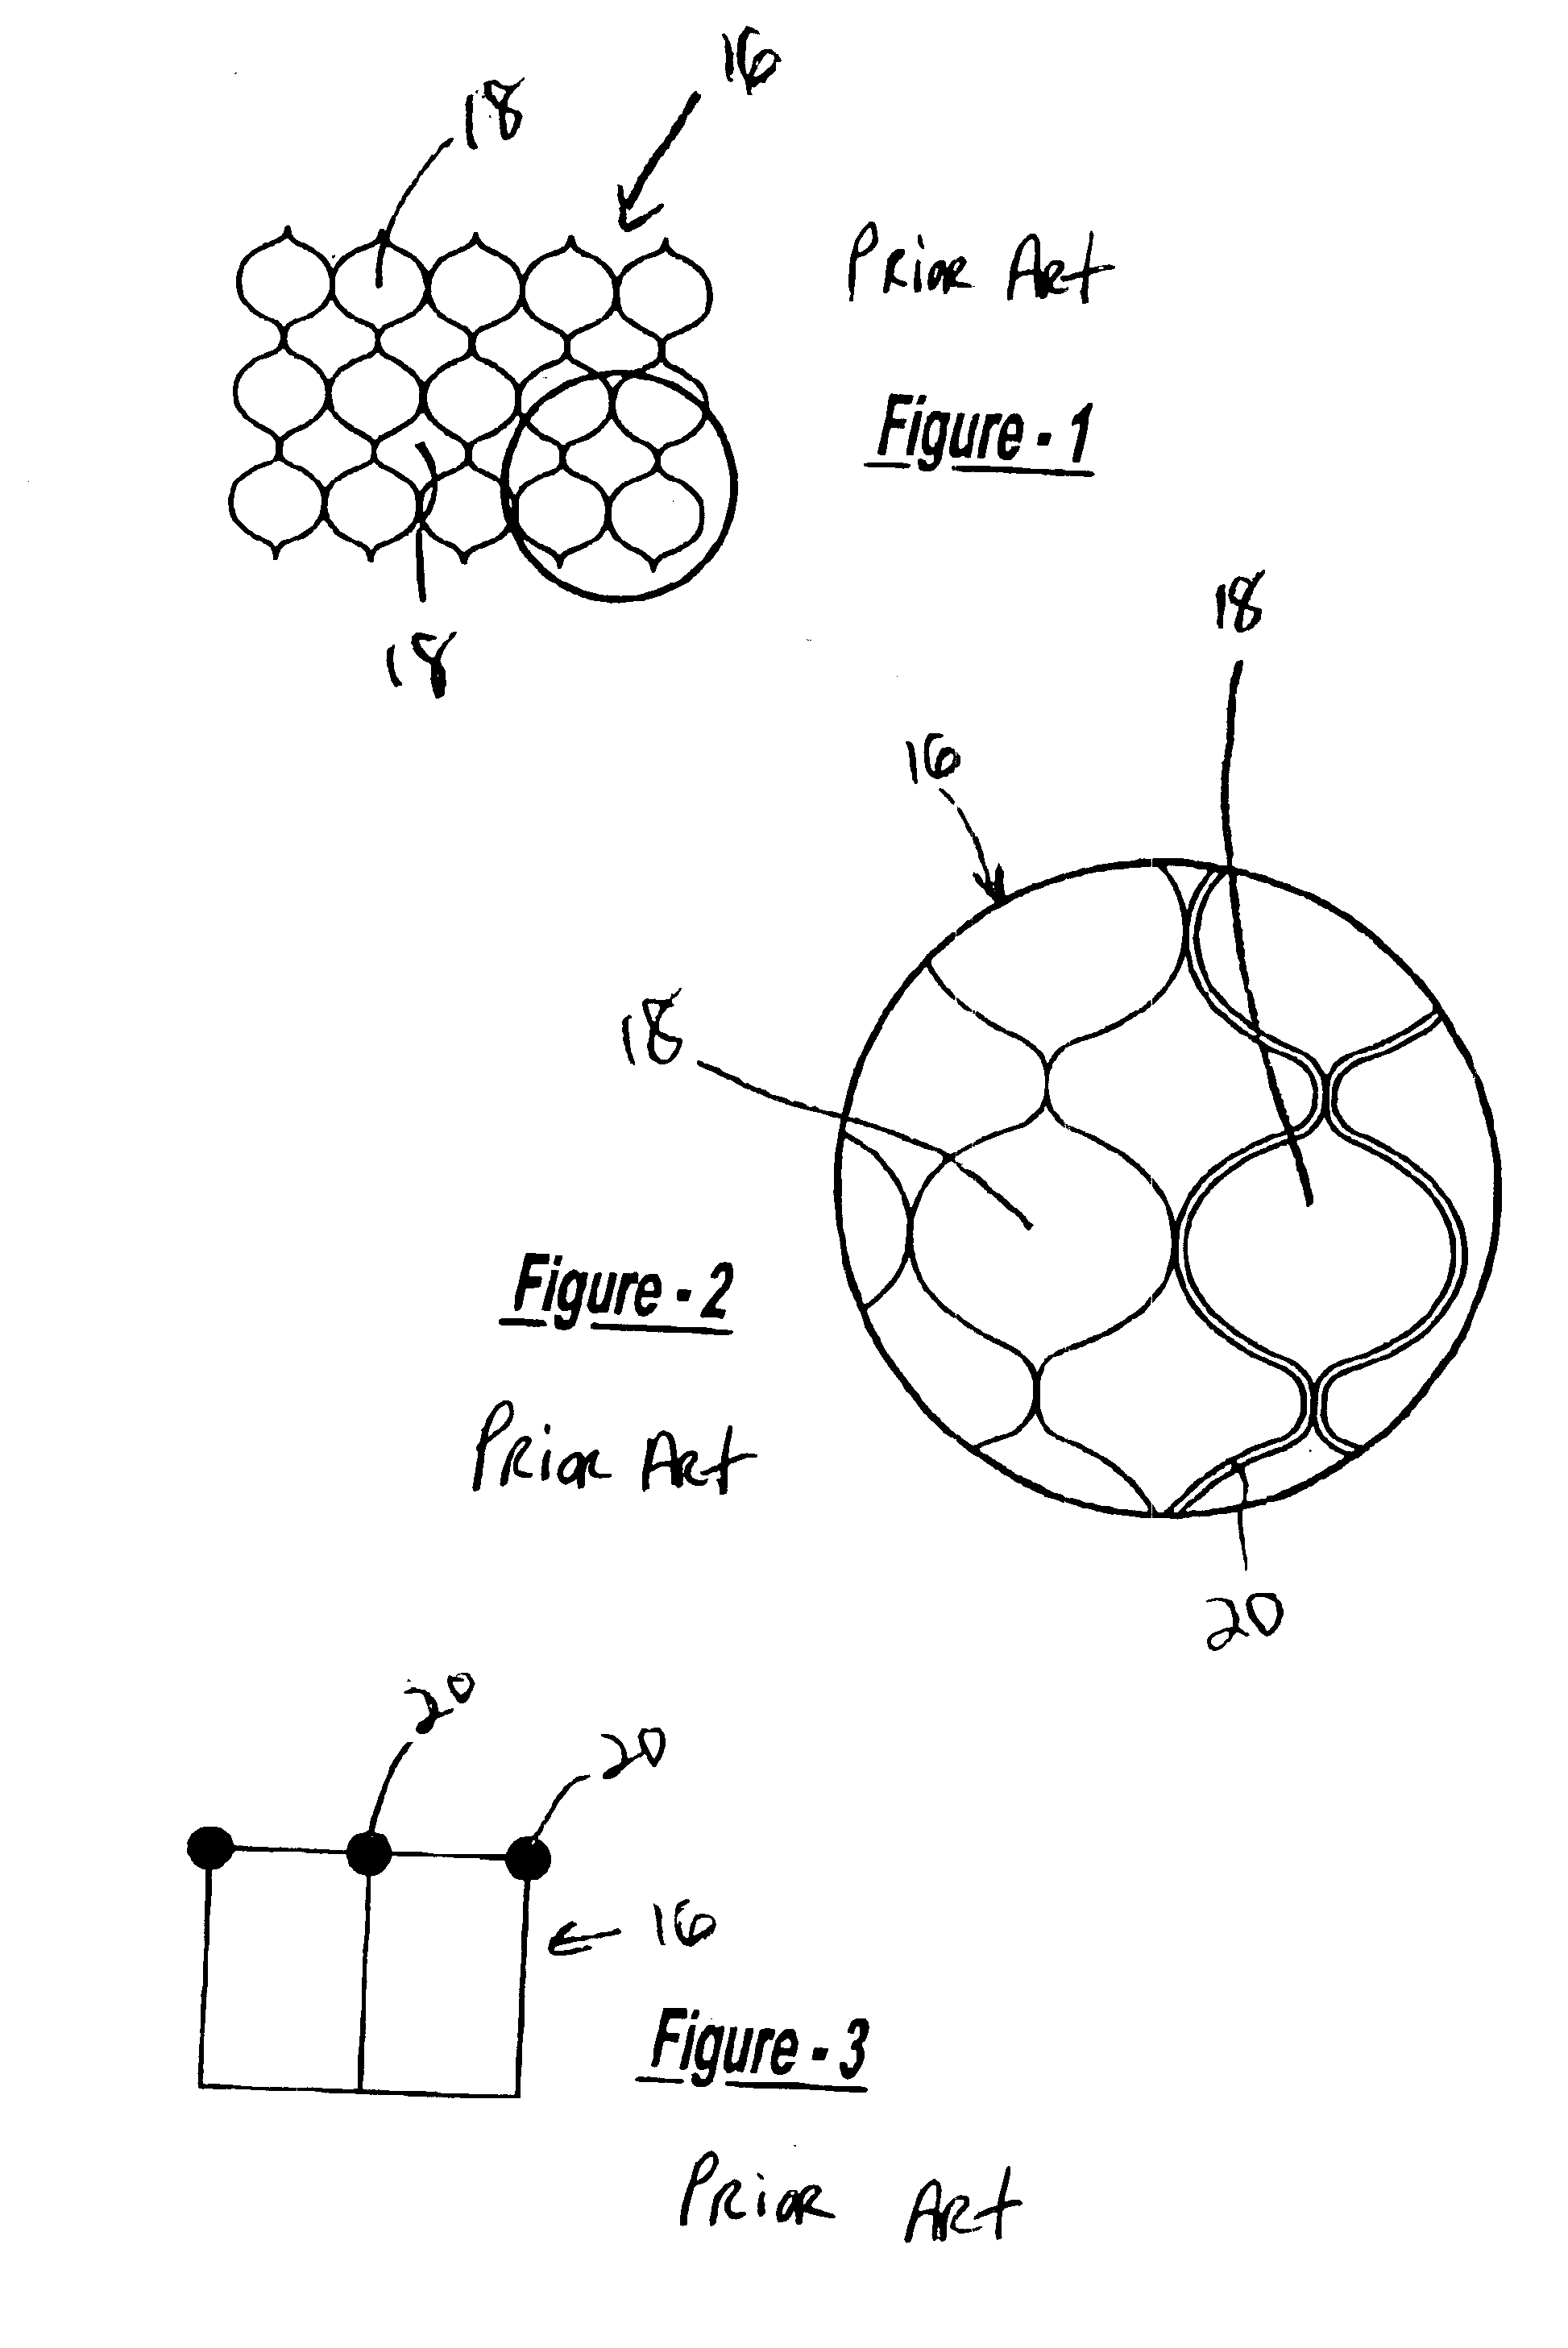 Method and apparatus for applying a film adhesive to a perforated panel